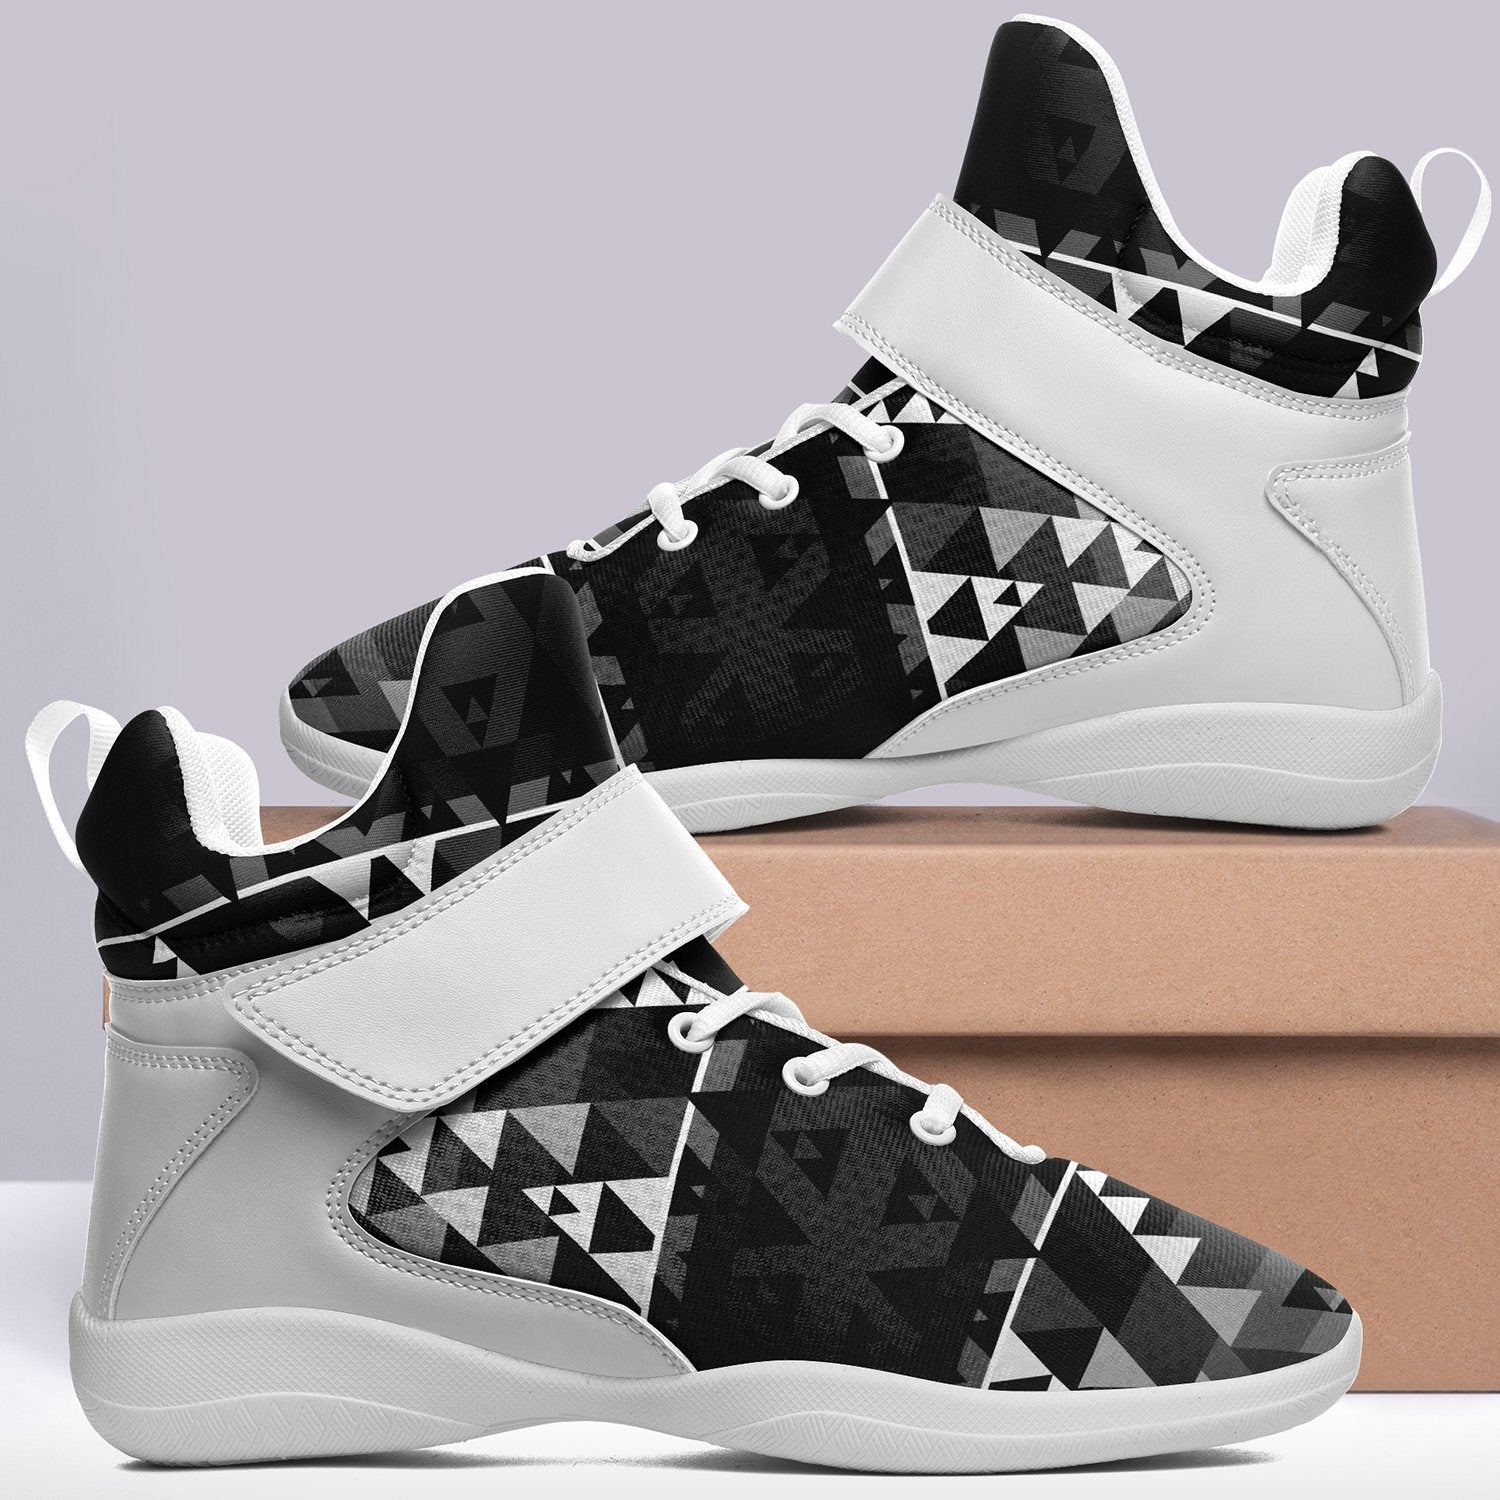 Writing on Stone Black and White Ipottaa Basketball / Sport High Top Shoes 49 Dzine 